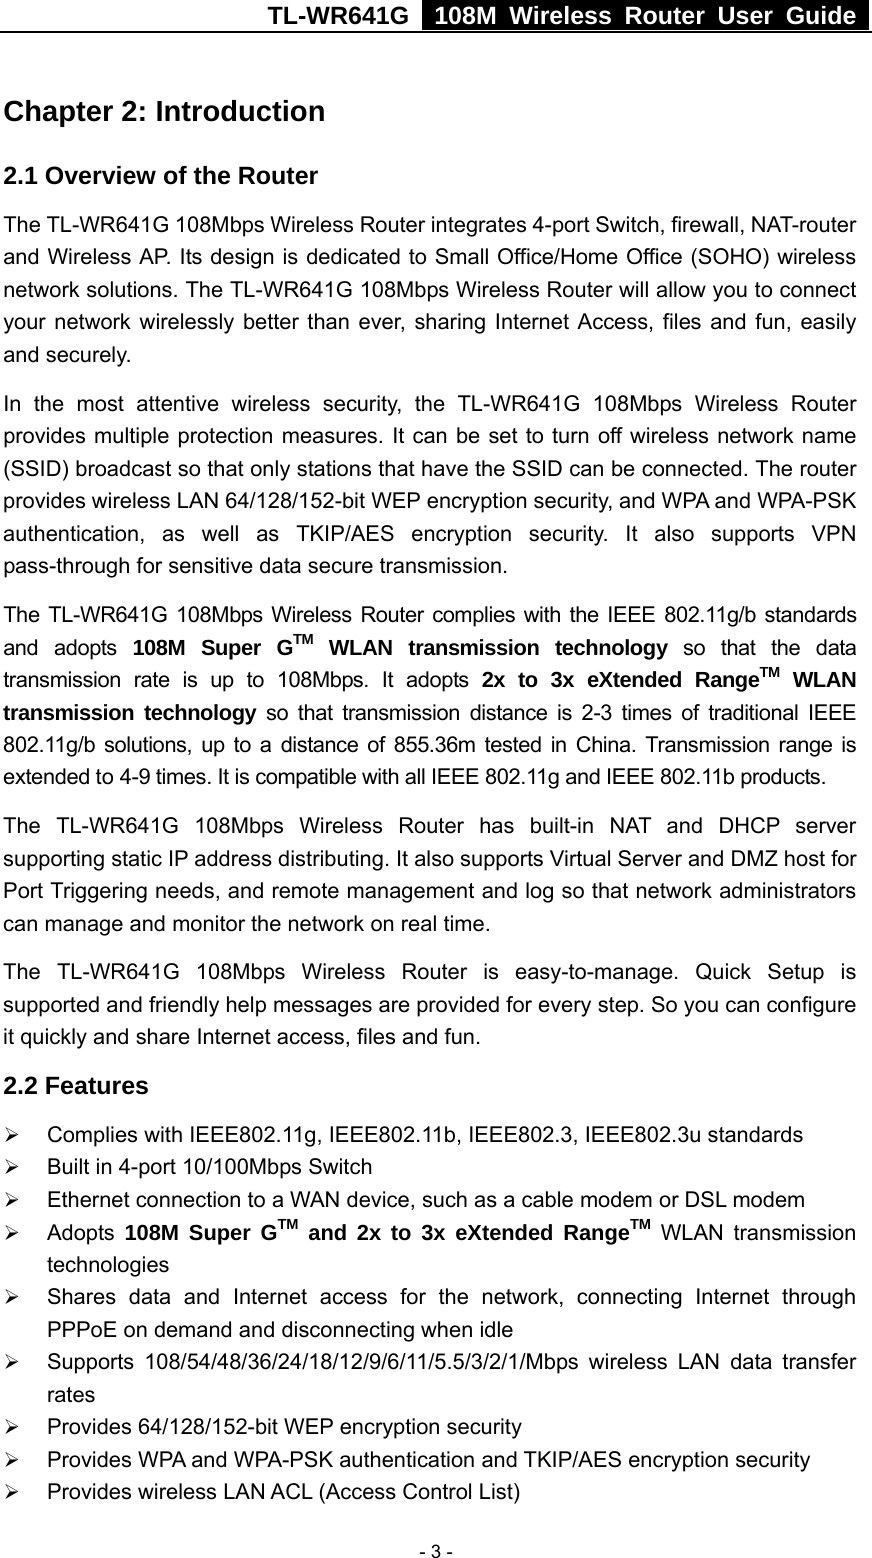 TL-WR641G   108M Wireless Router User Guide   - 3 -Chapter 2: Introduction 2.1 Overview of the Router The TL-WR641G 108Mbps Wireless Router integrates 4-port Switch, firewall, NAT-router and Wireless AP. Its design is dedicated to Small Office/Home Office (SOHO) wireless network solutions. The TL-WR641G 108Mbps Wireless Router will allow you to connect your network wirelessly better than ever, sharing Internet Access, files and fun, easily and securely. In the most attentive wireless security, the TL-WR641G 108Mbps Wireless Router provides multiple protection measures. It can be set to turn off wireless network name (SSID) broadcast so that only stations that have the SSID can be connected. The router provides wireless LAN 64/128/152-bit WEP encryption security, and WPA and WPA-PSK authentication, as well as TKIP/AES encryption security. It also supports VPN pass-through for sensitive data secure transmission. The TL-WR641G 108Mbps Wireless Router complies with the IEEE 802.11g/b standards and adopts 108M Super GTM WLAN transmission technology so that the data transmission rate is up to 108Mbps. It adopts 2x to 3x eXtended RangeTM WLAN transmission technology so that transmission distance is 2-3 times of traditional IEEE 802.11g/b solutions, up to a distance of 855.36m tested in China. Transmission range is extended to 4-9 times. It is compatible with all IEEE 802.11g and IEEE 802.11b products. The TL-WR641G 108Mbps Wireless Router has built-in NAT and DHCP server supporting static IP address distributing. It also supports Virtual Server and DMZ host for Port Triggering needs, and remote management and log so that network administrators can manage and monitor the network on real time.   The TL-WR641G 108Mbps Wireless Router is easy-to-manage. Quick Setup is supported and friendly help messages are provided for every step. So you can configure it quickly and share Internet access, files and fun. 2.2 Features ¾ Complies with IEEE802.11g, IEEE802.11b, IEEE802.3, IEEE802.3u standards ¾ Built in 4-port 10/100Mbps Switch ¾ Ethernet connection to a WAN device, such as a cable modem or DSL modem ¾ Adopts  108M Super GTM and 2x to 3x eXtended RangeTM WLAN transmission technologies ¾ Shares data and Internet access for the network, connecting Internet through PPPoE on demand and disconnecting when idle ¾ Supports 108/54/48/36/24/18/12/9/6/11/5.5/3/2/1/Mbps  wireless LAN data transfer rates ¾ Provides 64/128/152-bit WEP encryption security ¾ Provides WPA and WPA-PSK authentication and TKIP/AES encryption security ¾ Provides wireless LAN ACL (Access Control List)   